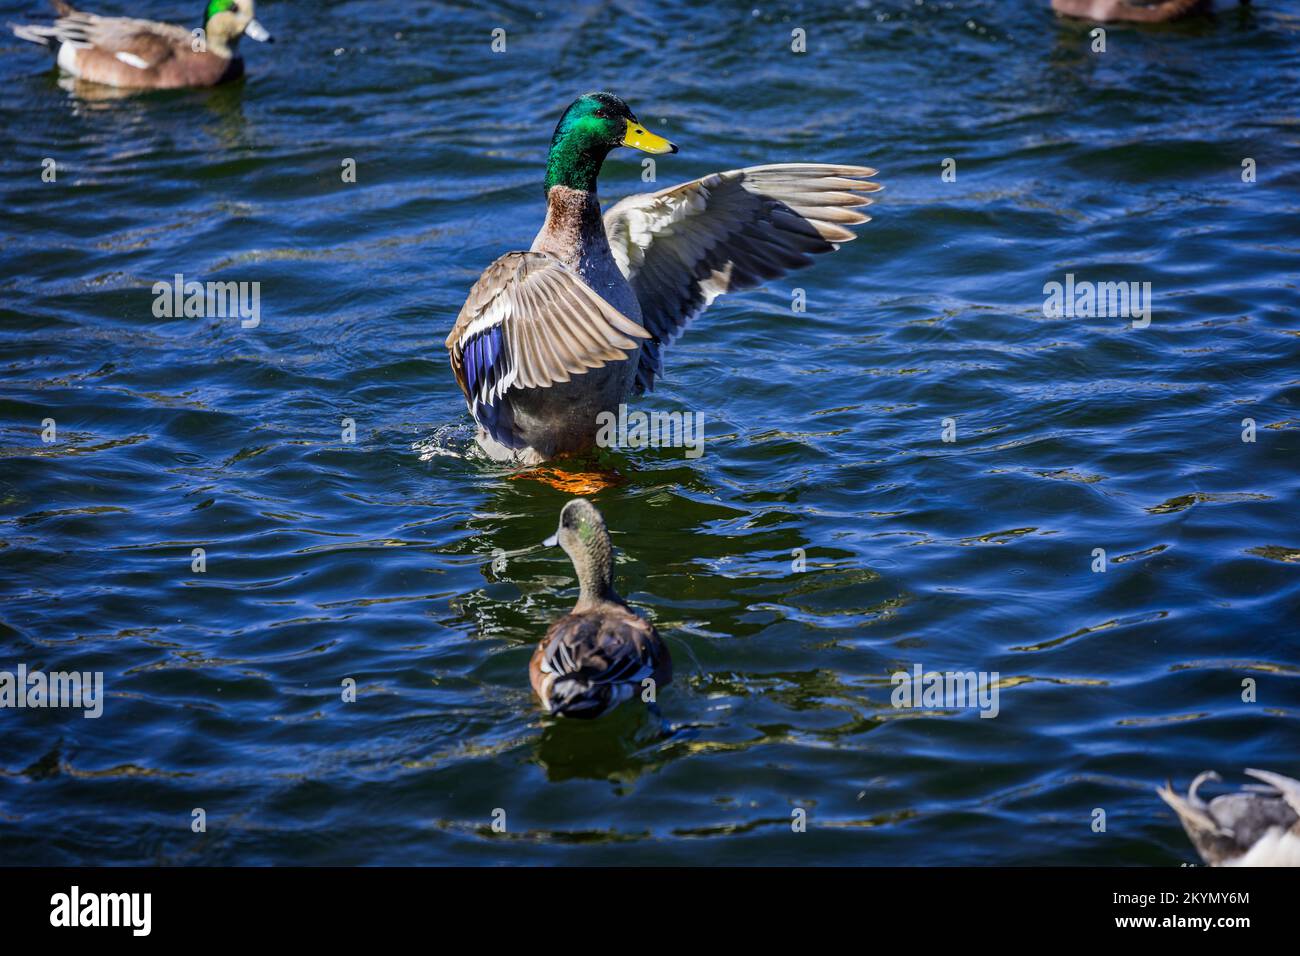 Anatra in acqua verticale flapping Wings Foto Stock